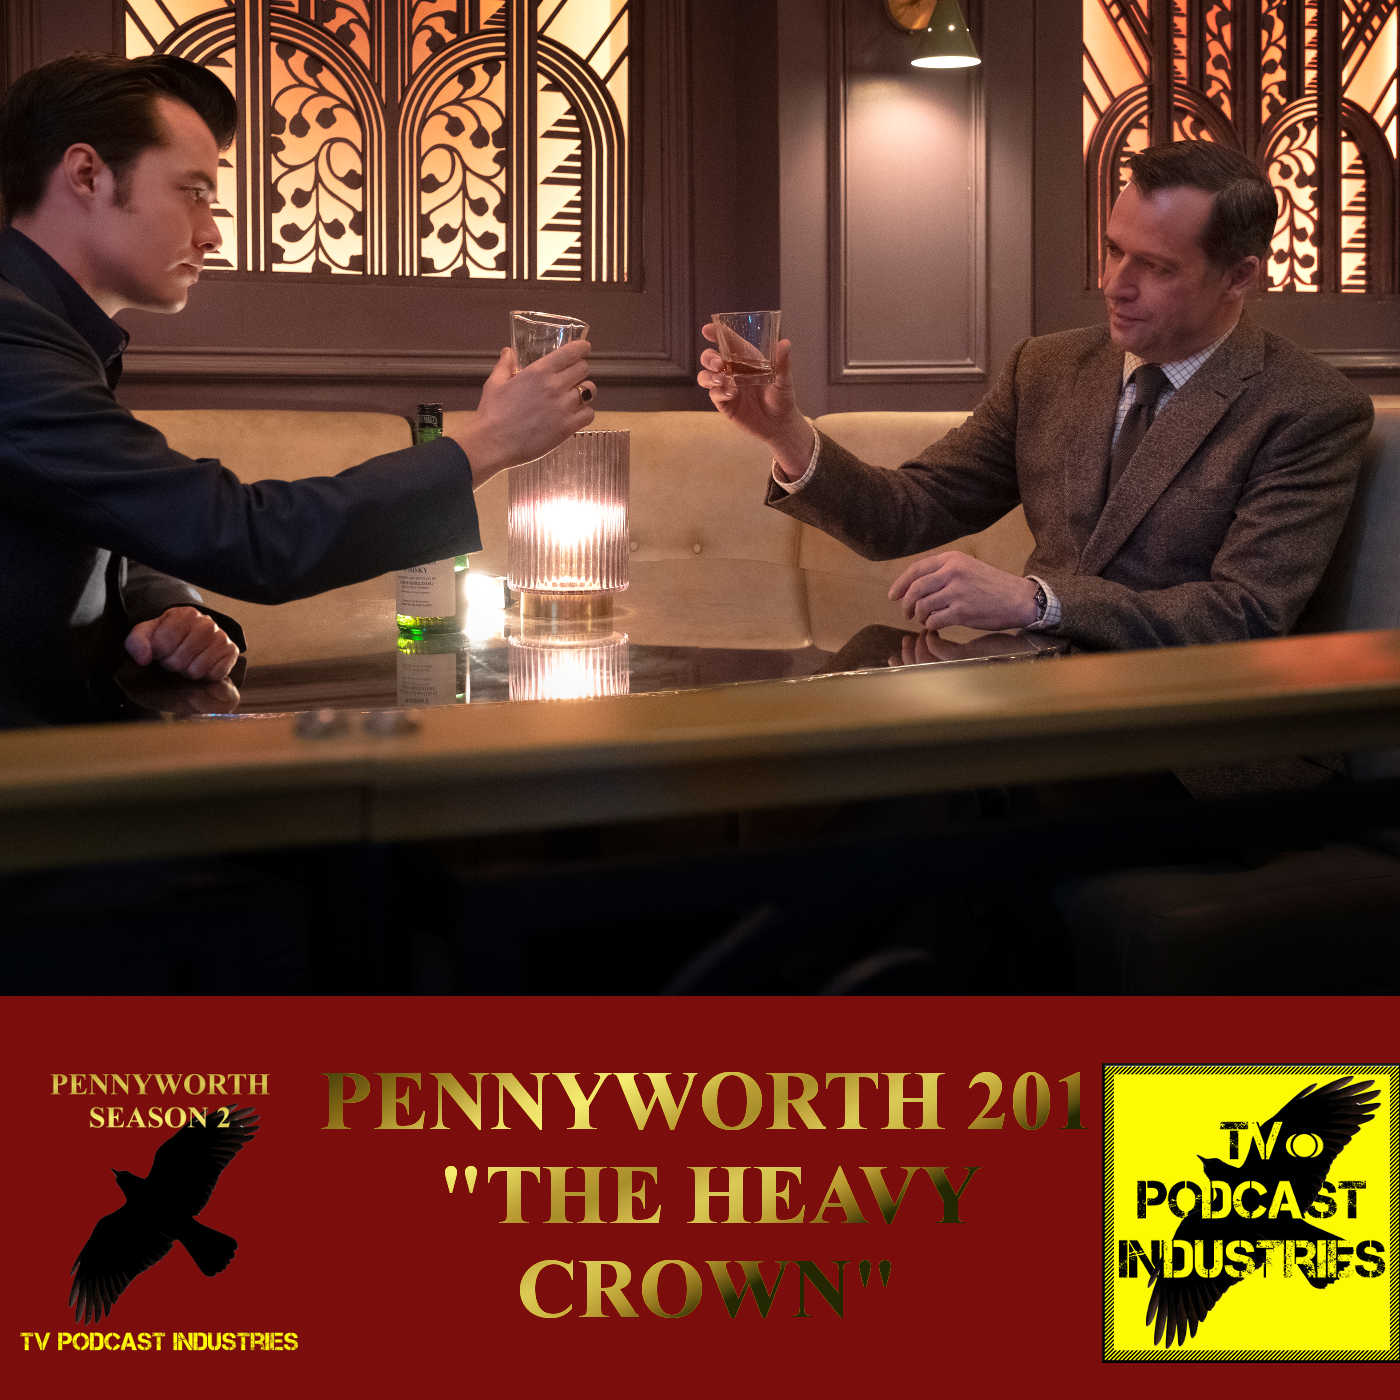 Pennyworth Season 2 Episode 1 "The Heavy Crown" Podcast by TV Podcast Industries